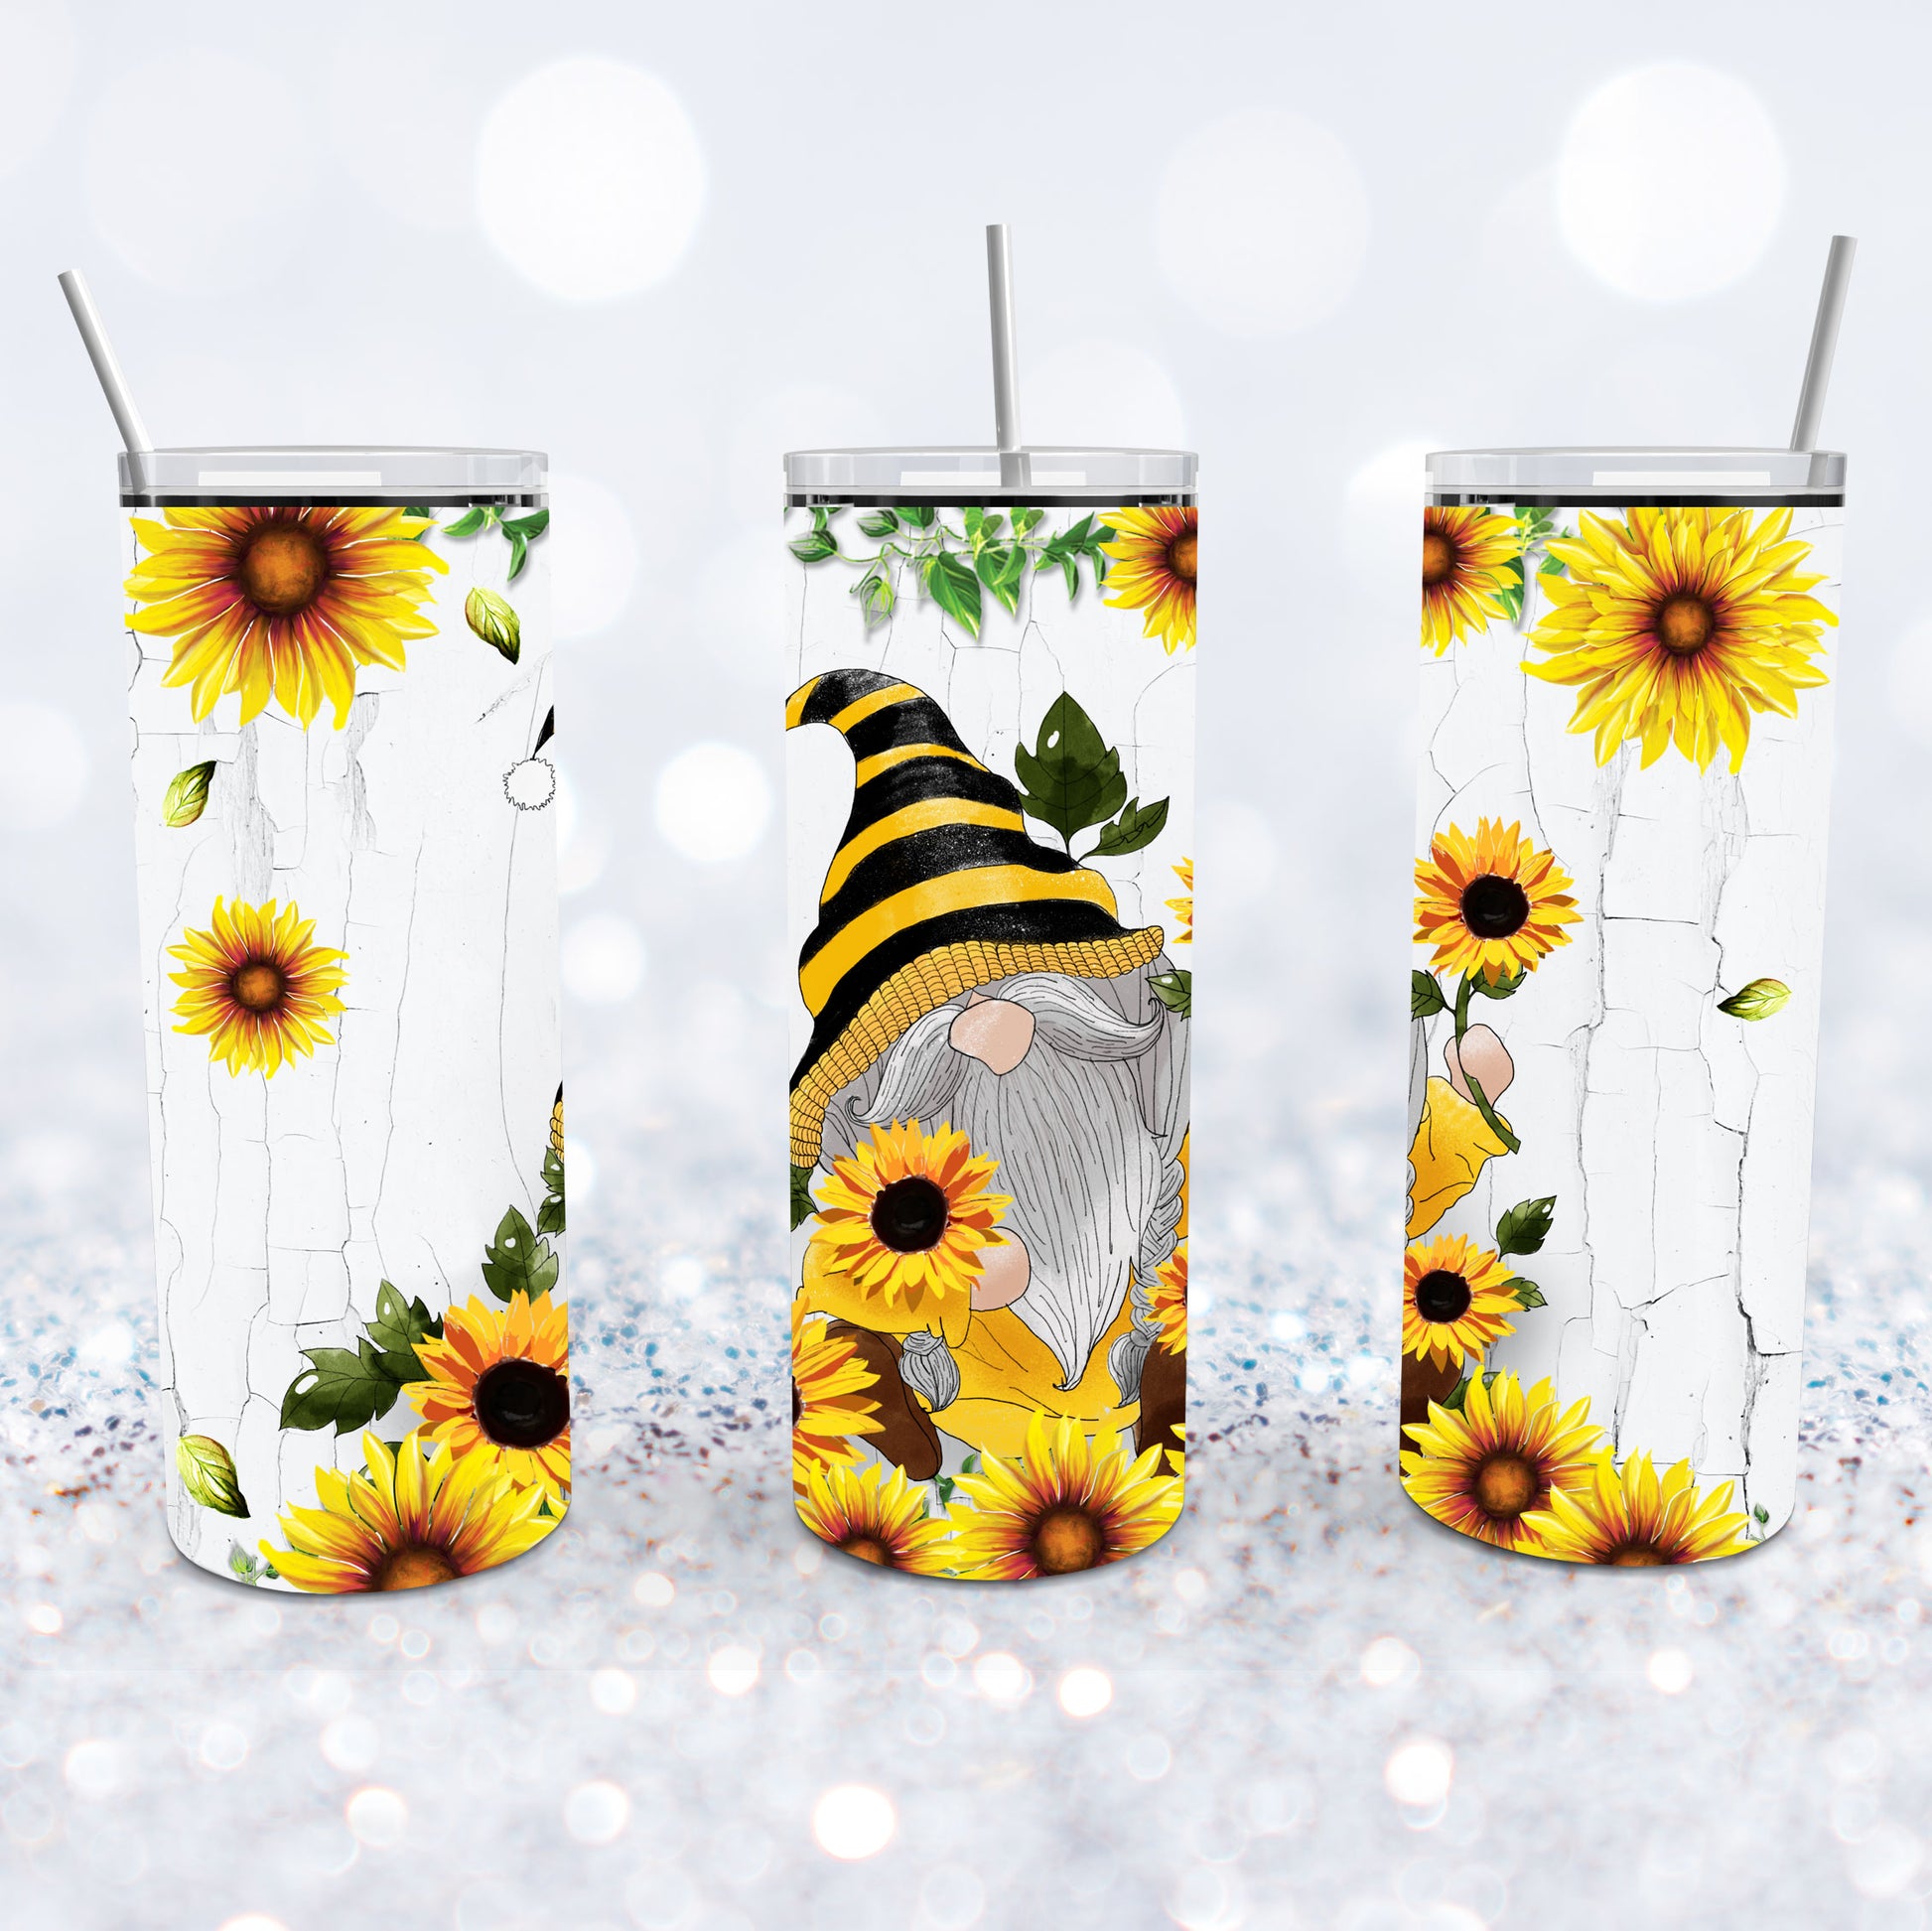 Sunflower Gnome 20 oz insulated tumbler with lid and straw